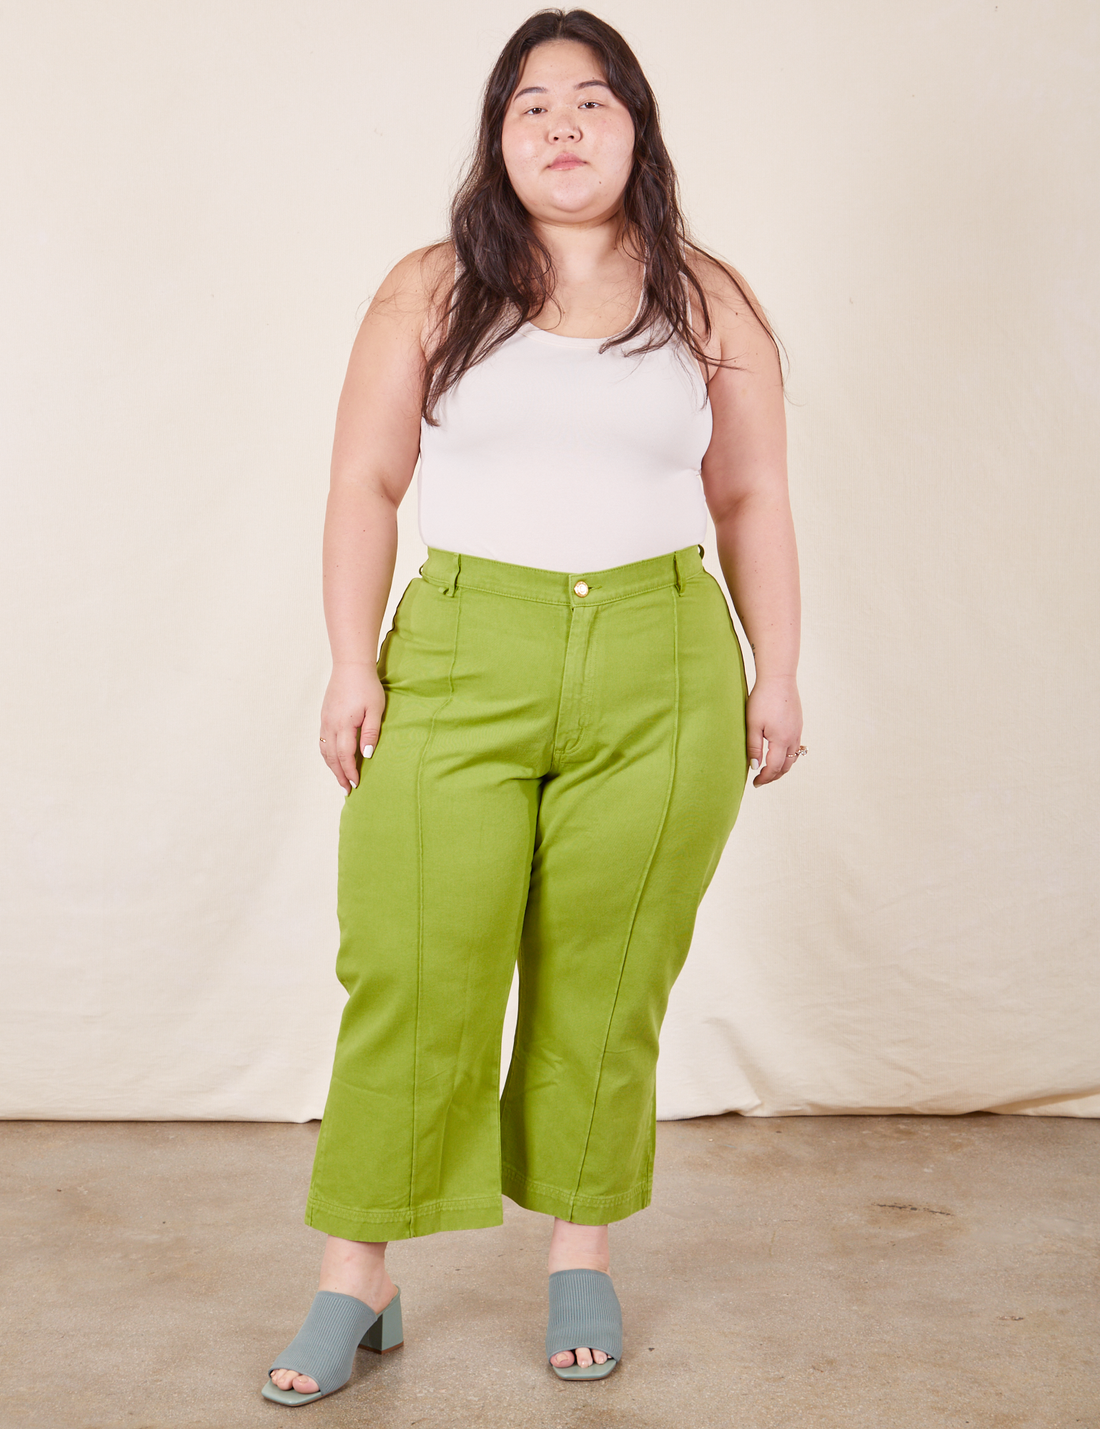 Ashley is 5'7 and wearing 1XL Petite Western Pants in Gross Green paired with a vintage-off white Tank Top